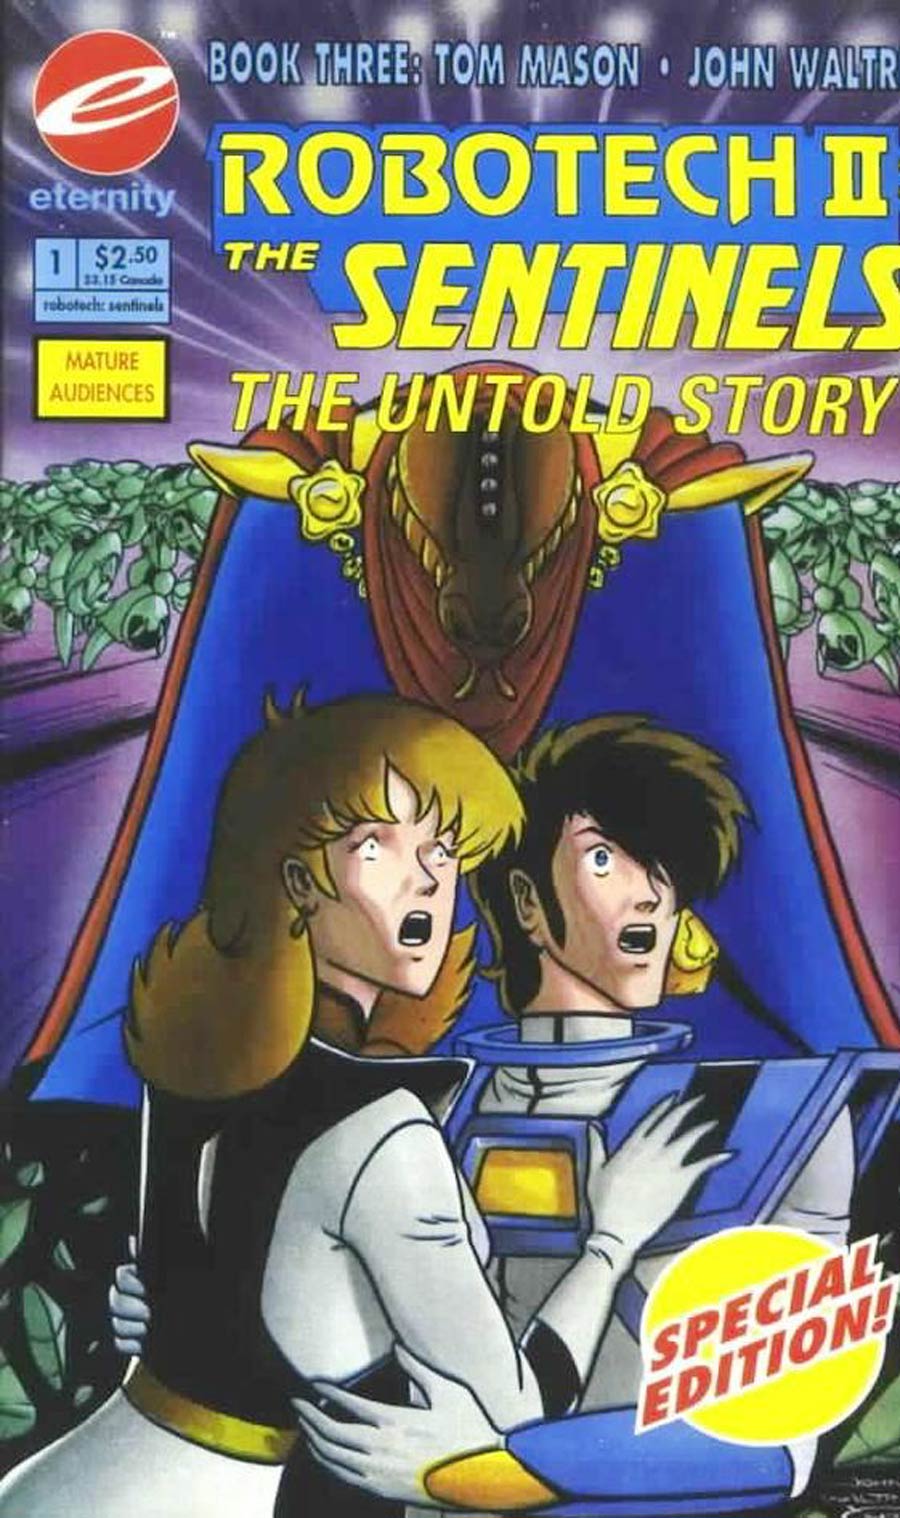 Robotech II The Sentinels Book 3 The Untold Story #1